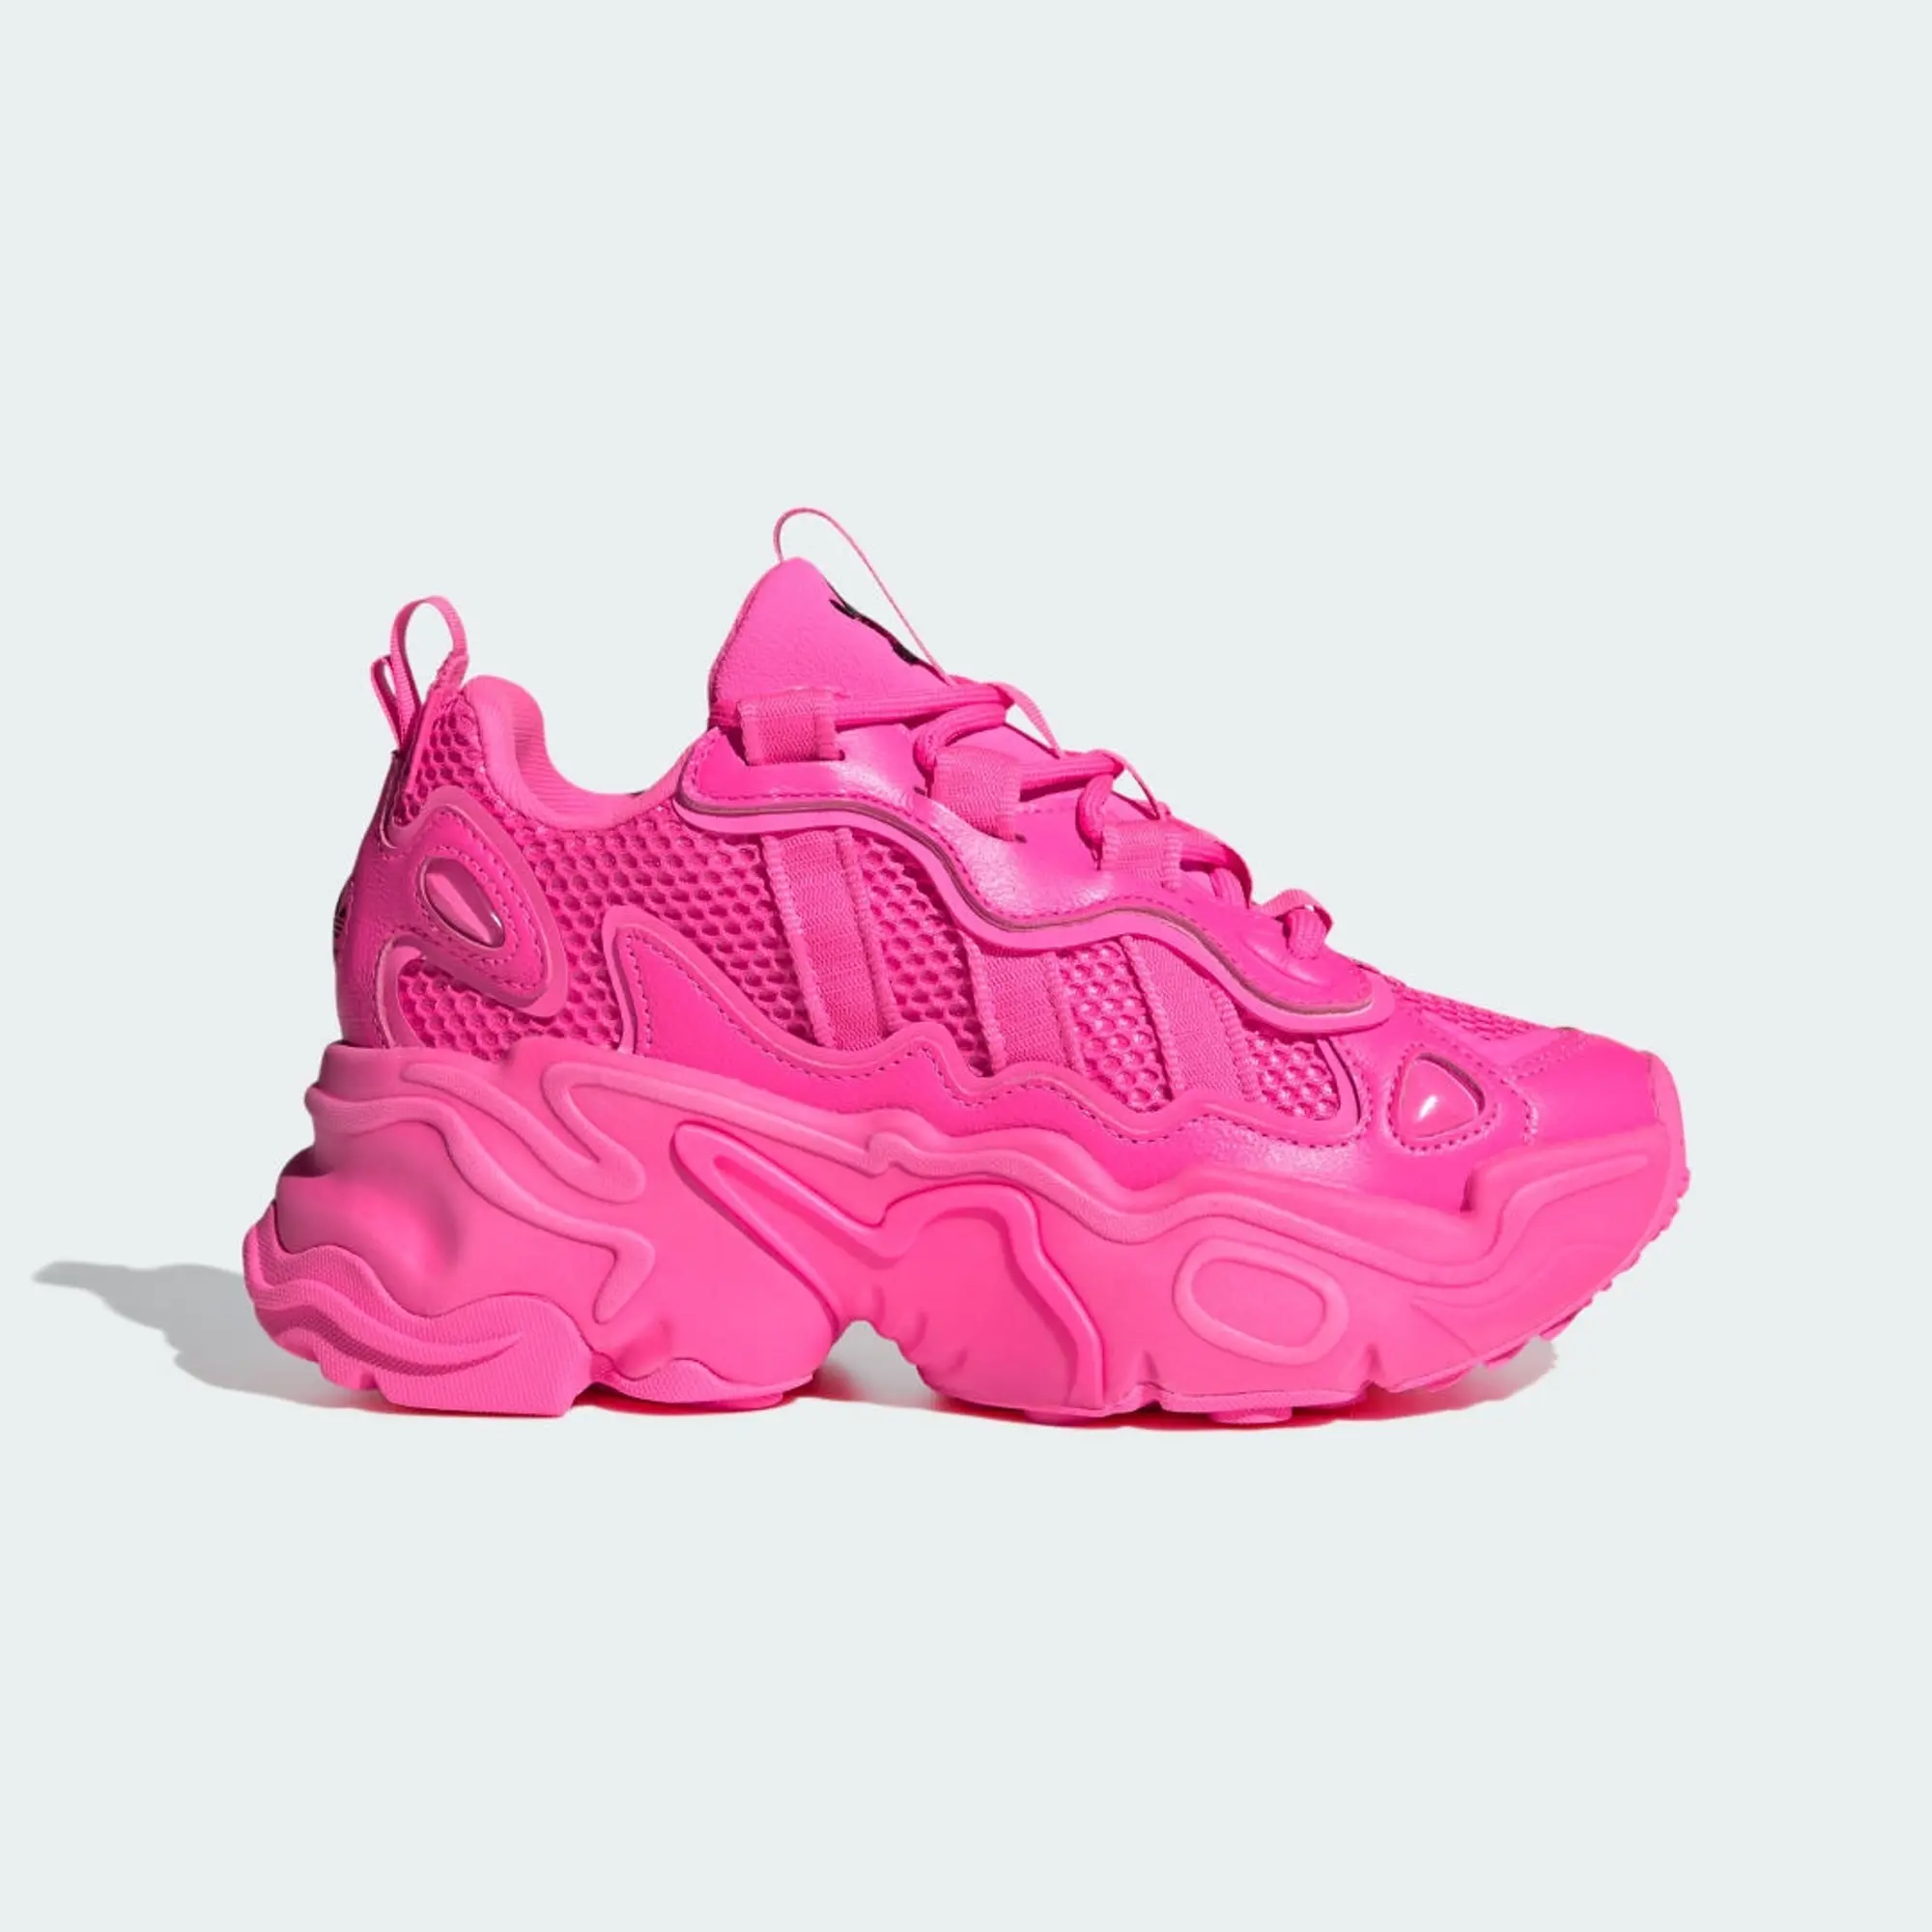 adidas OZWEEGO Shoes - Lucid Pink / Lucid Pink / Core Black